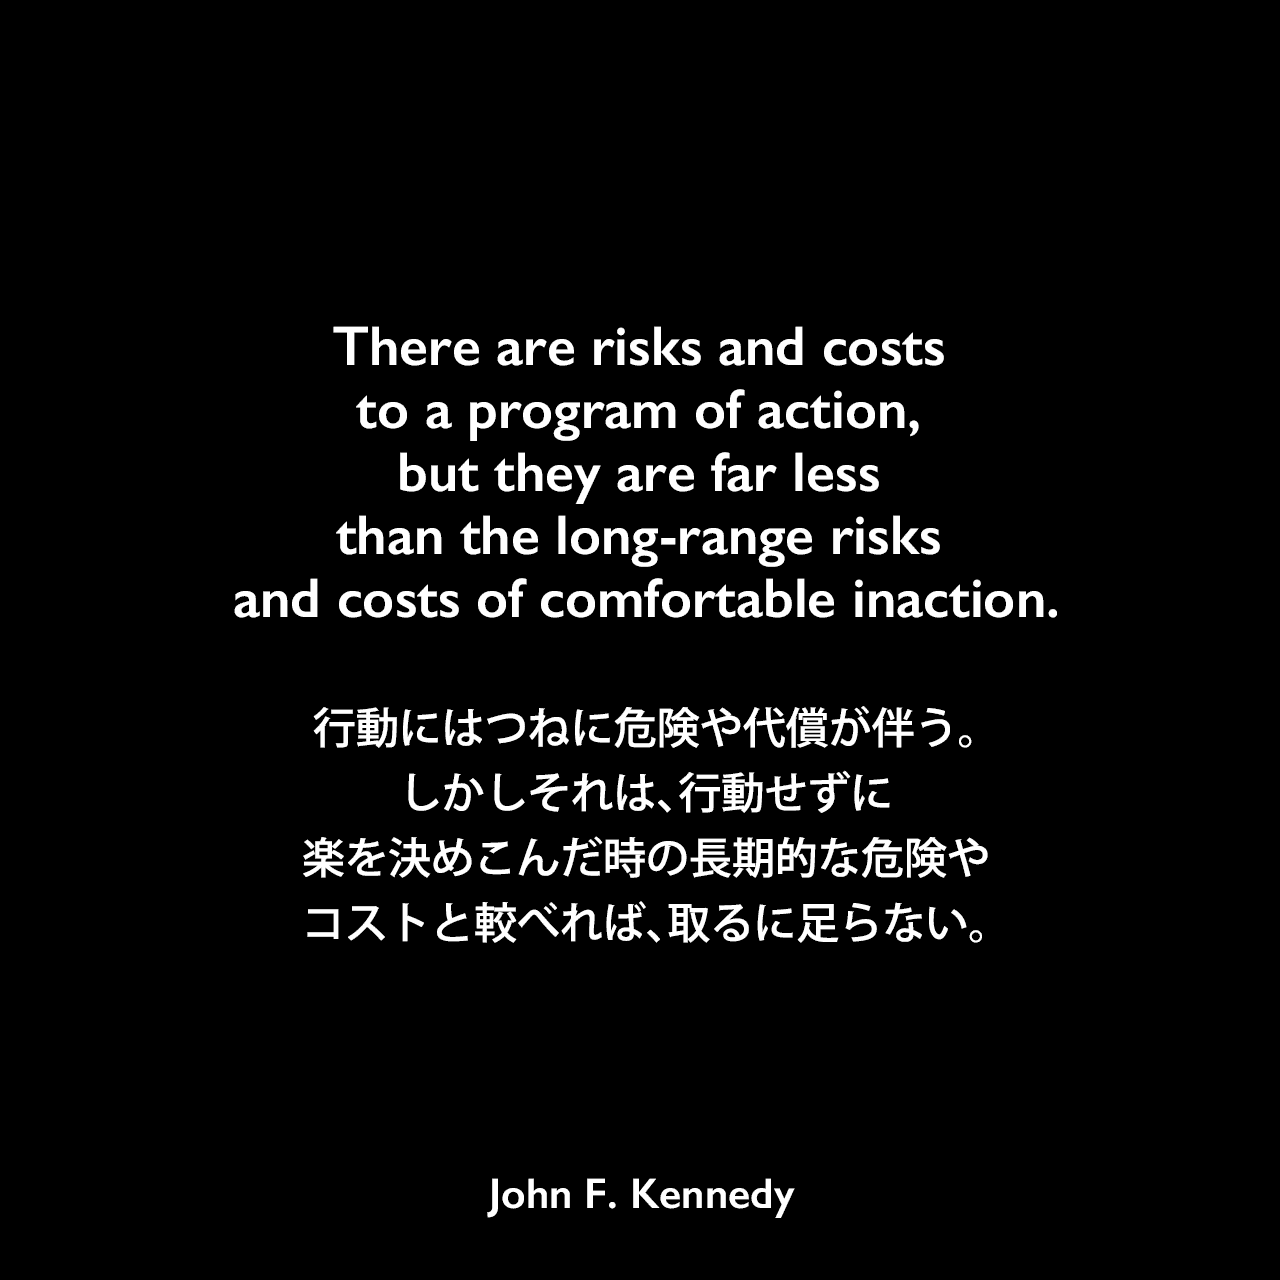 There are risks and costs to a program of action, but they are far less than the long-range risks and costs of comfortable inaction.行動にはつねに危険や代償が伴う。しかしそれは、行動せずに楽を決めこんだ時の長期的な危険やコストと較べれば、取るに足らない。John F Kennedy